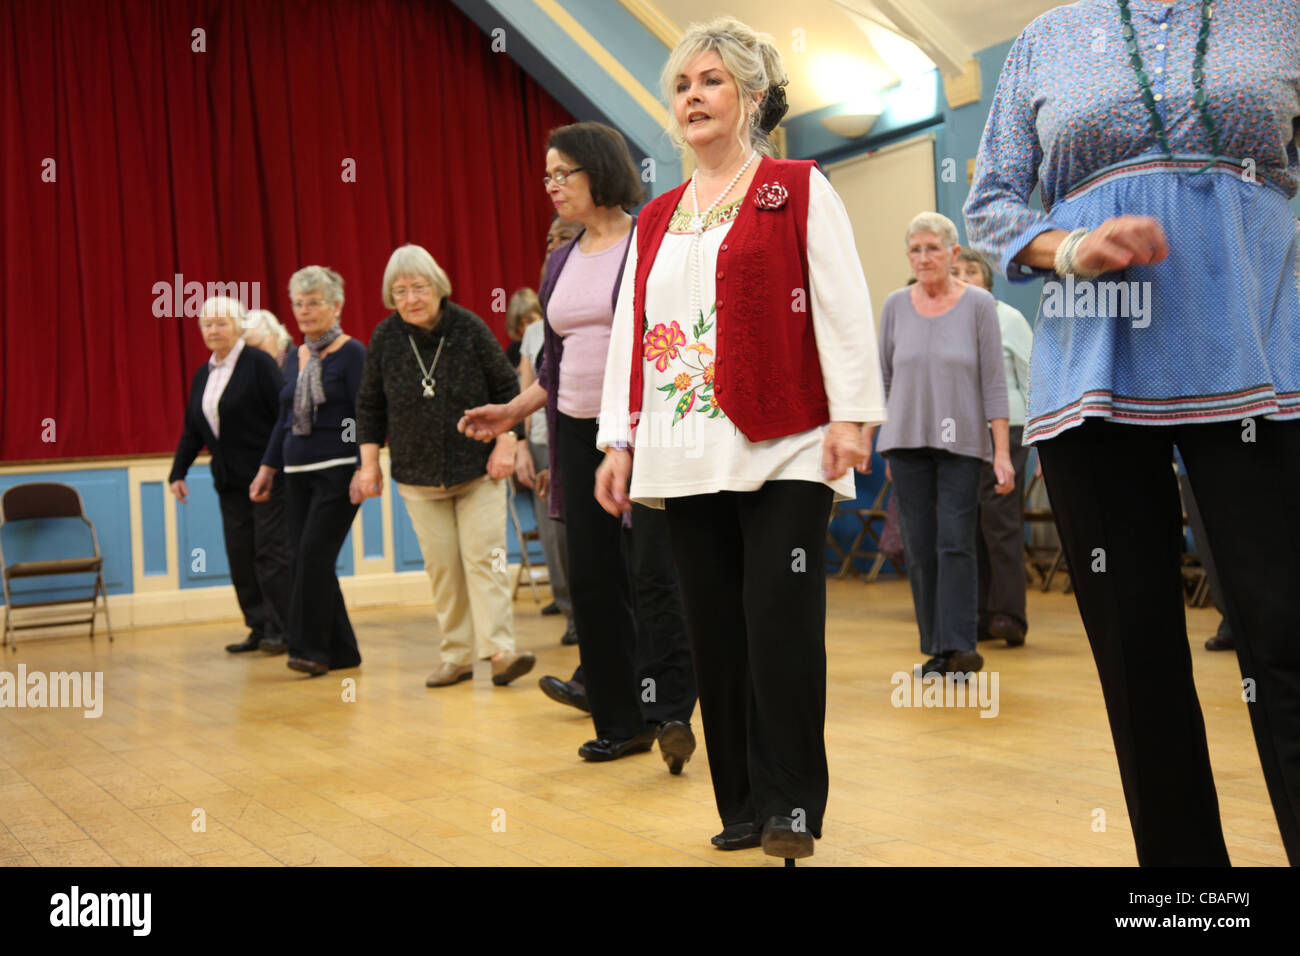 Women linedancing in a community hall Stock Photo